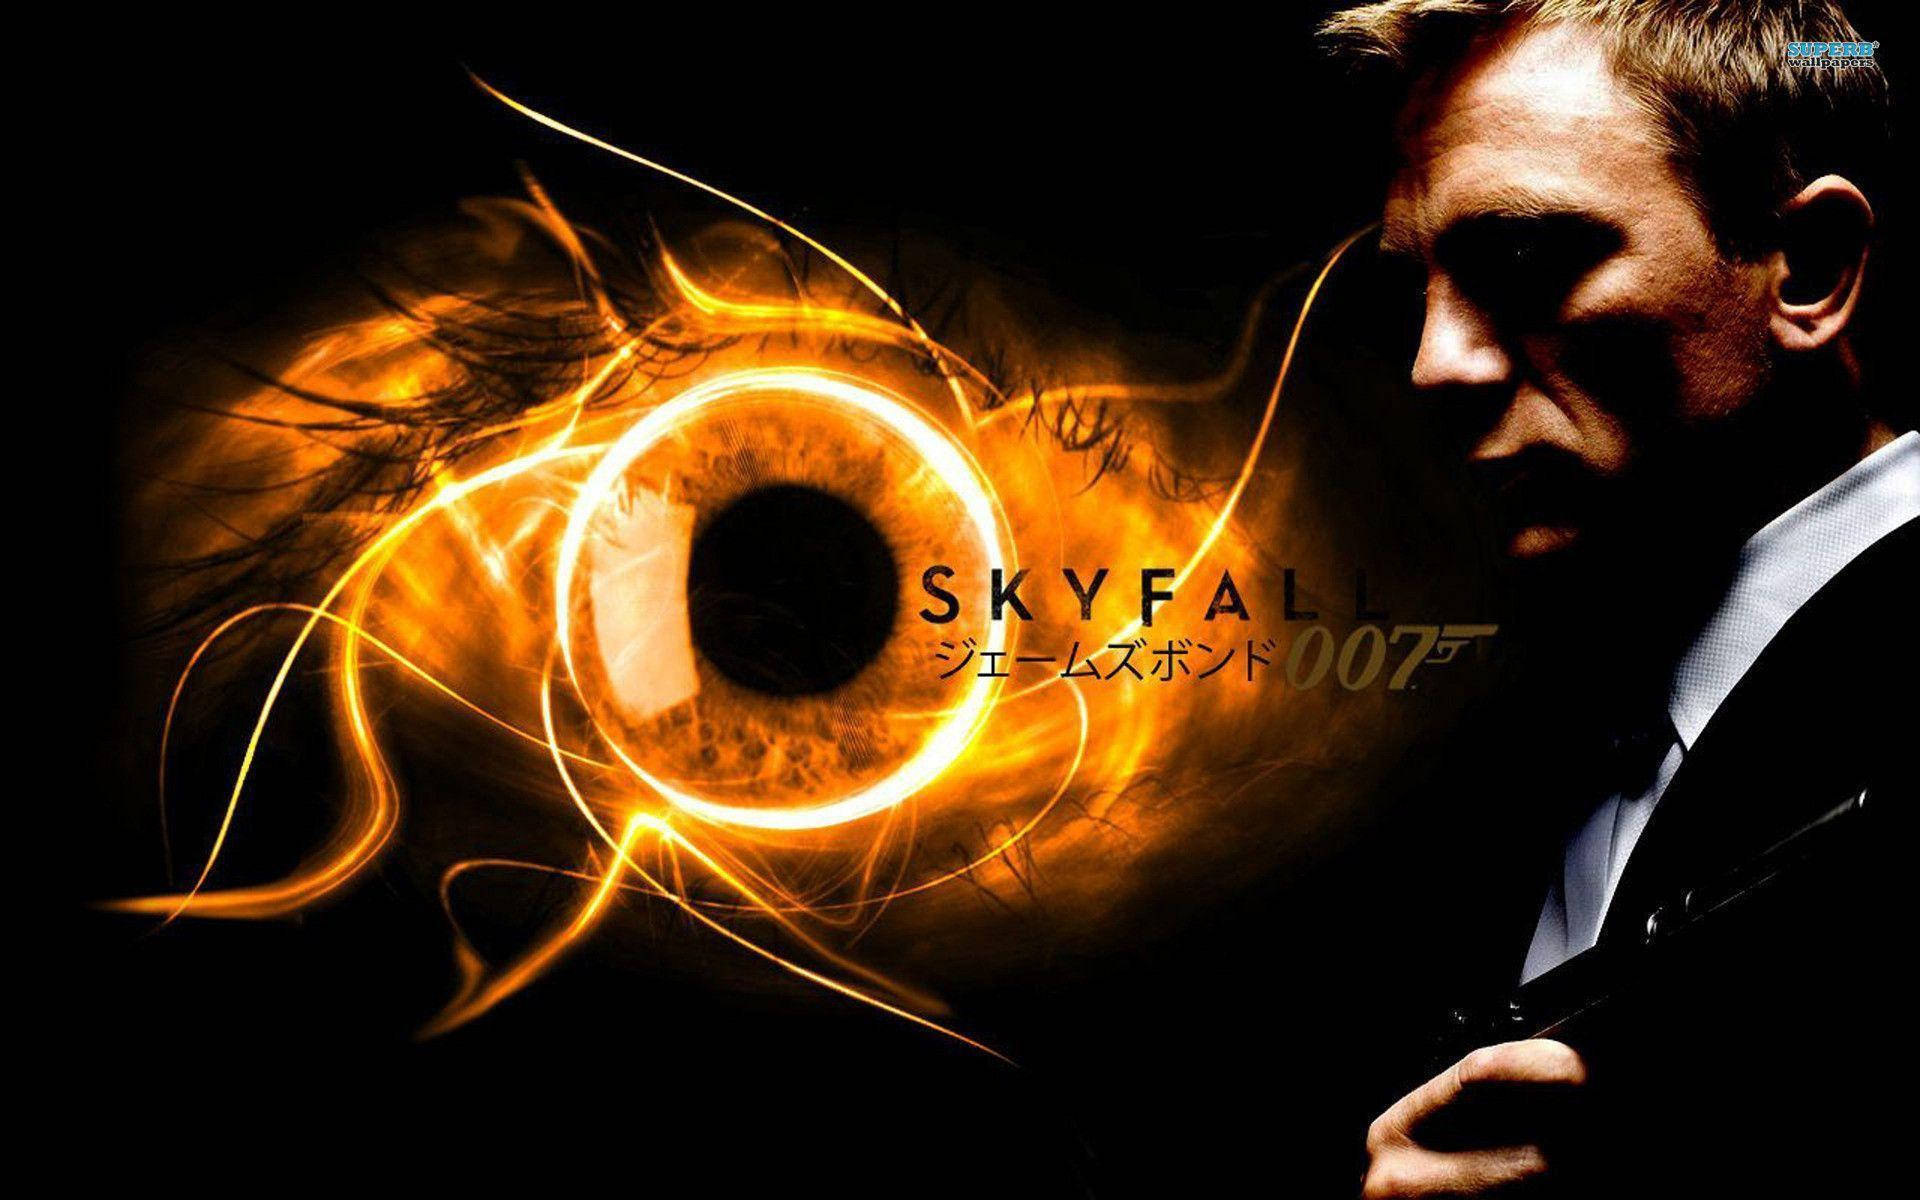 skyfall poster official